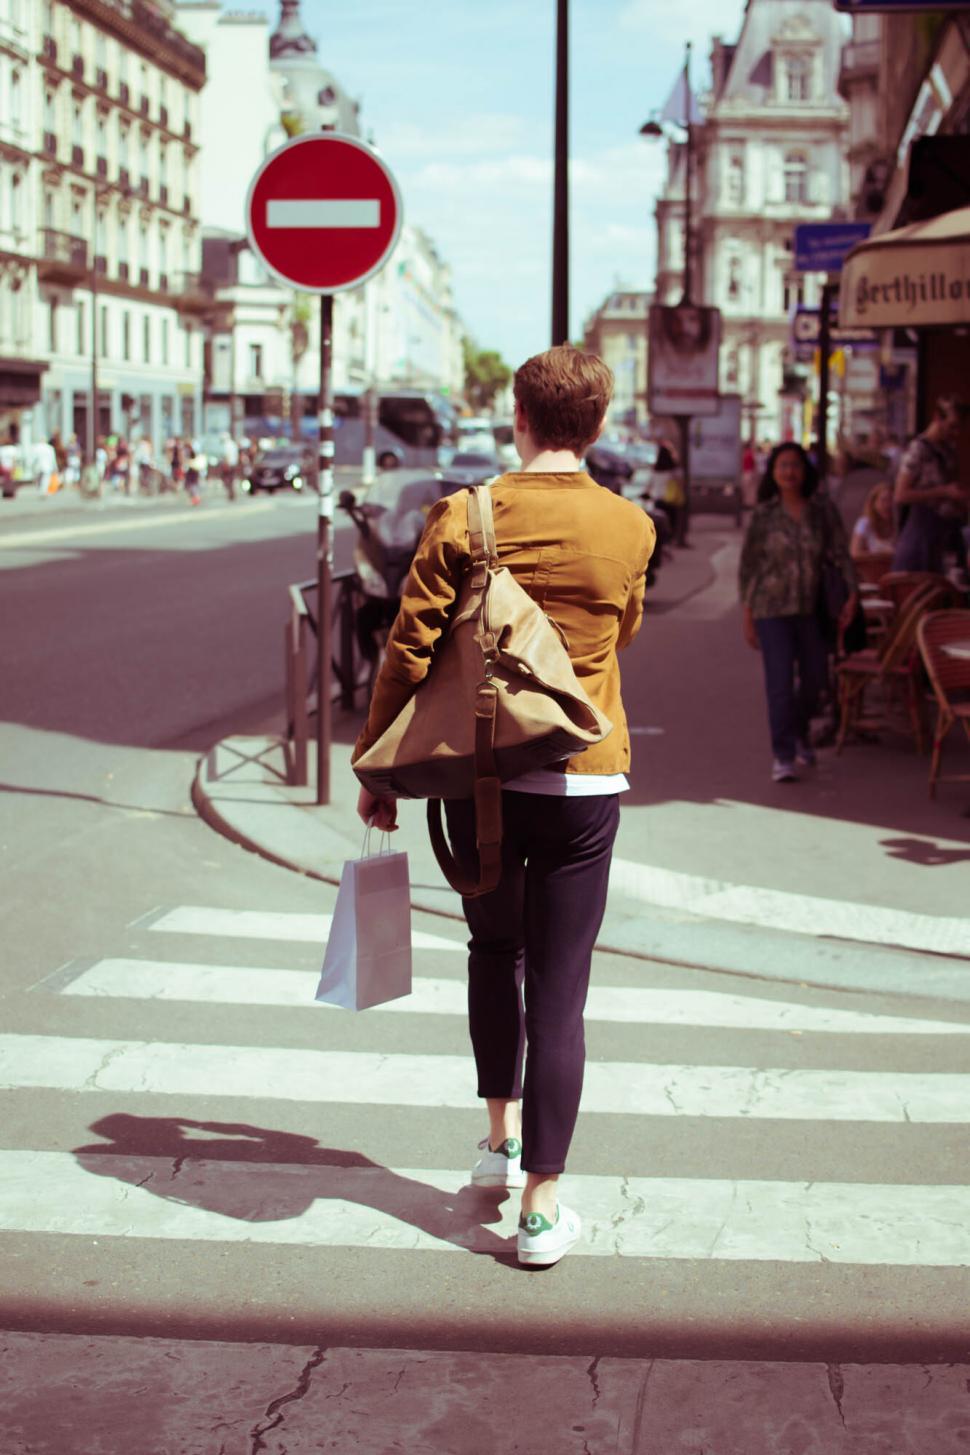 Free Image of Person crossing street in stylish attire 